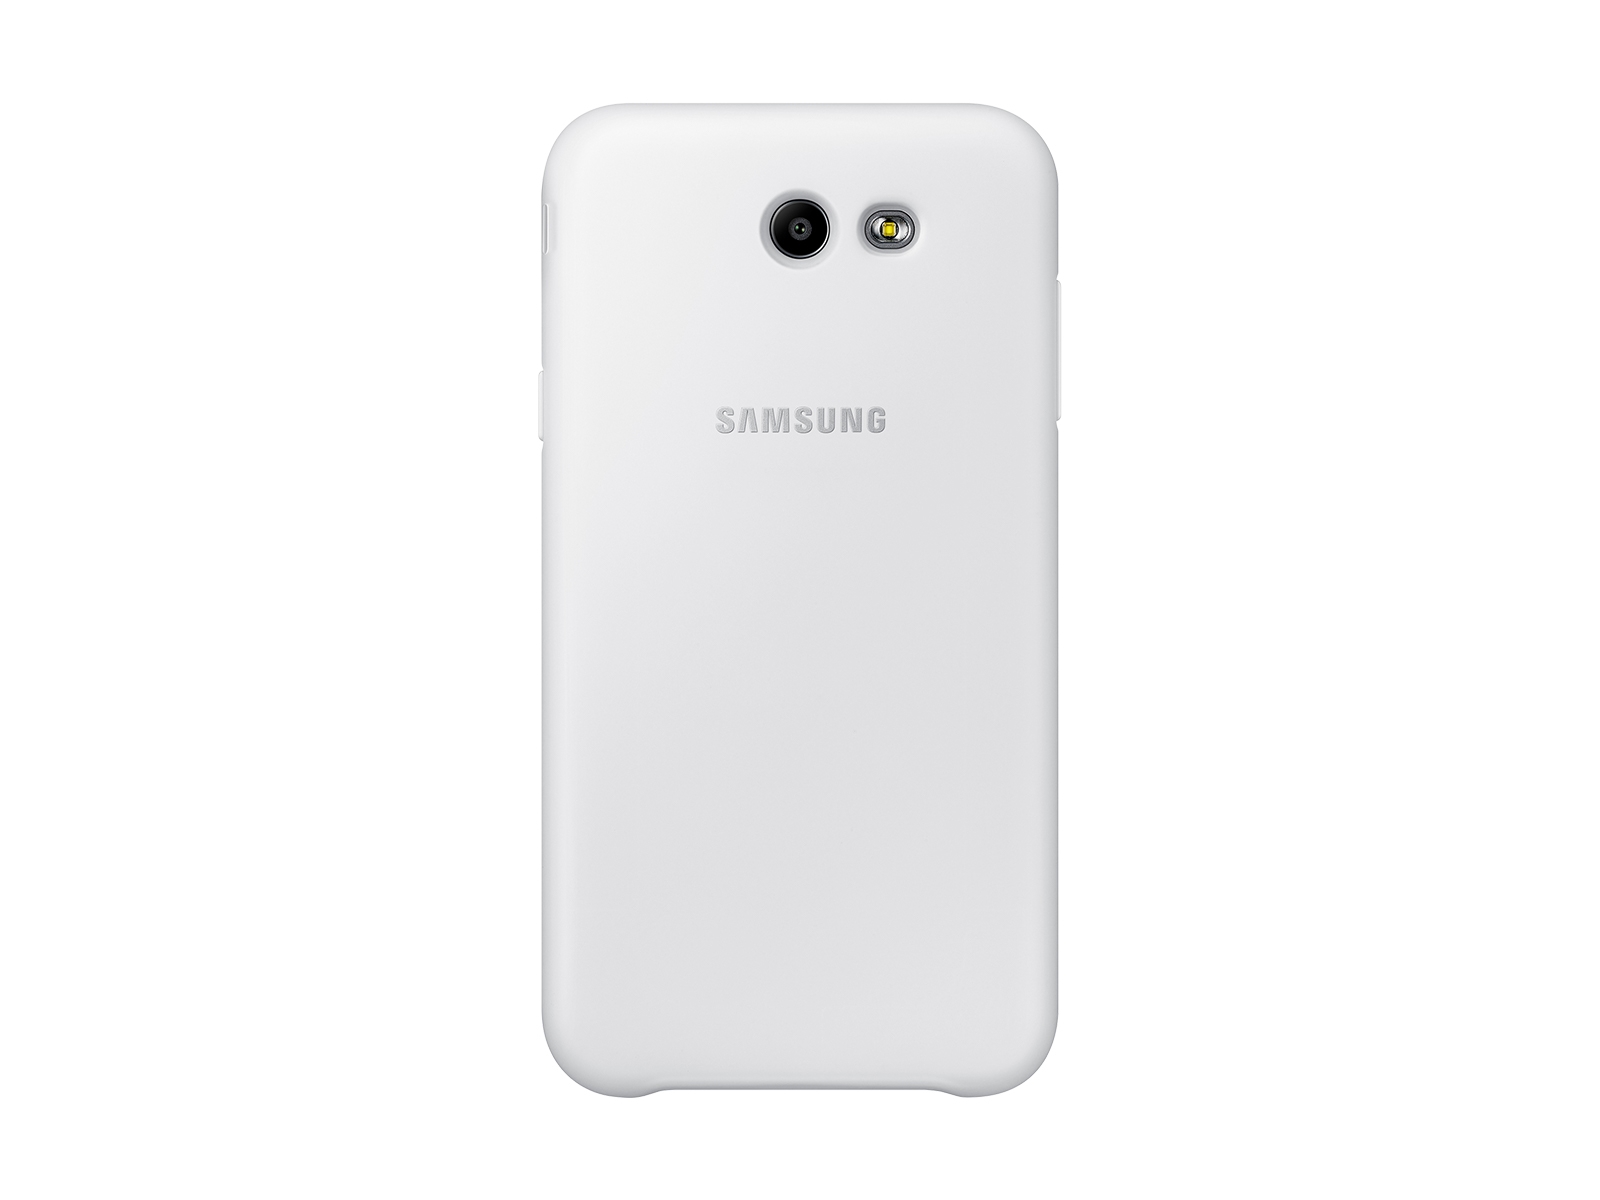 Galaxy J3 Protective Cover White Mobile Accessories Ef Pj327cwegus Samsung Us